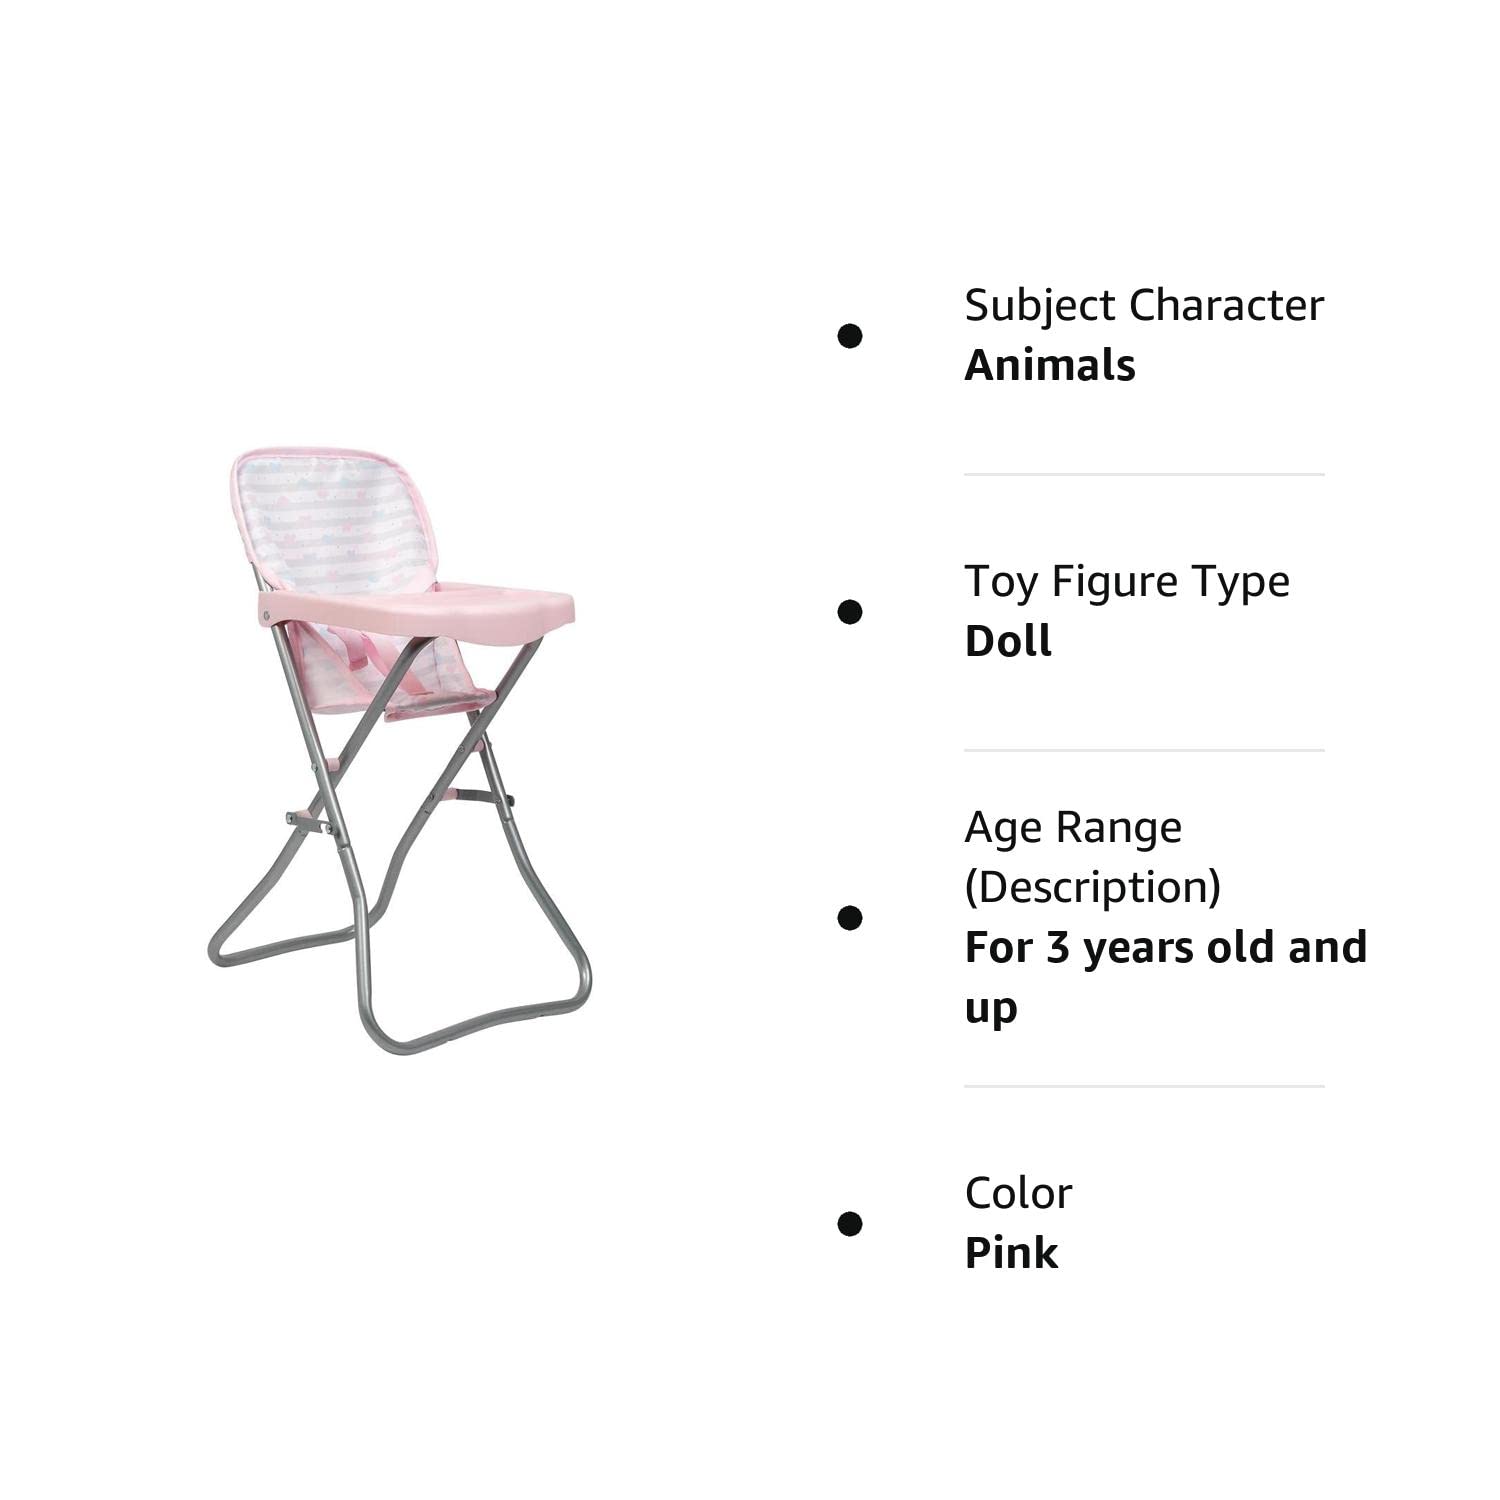 Adora Baby Doll Accessories Pink High Chair, Can Fit Up to 16 inch Dolls, 20.5 inches in Height, Baby Pink and Grey Print